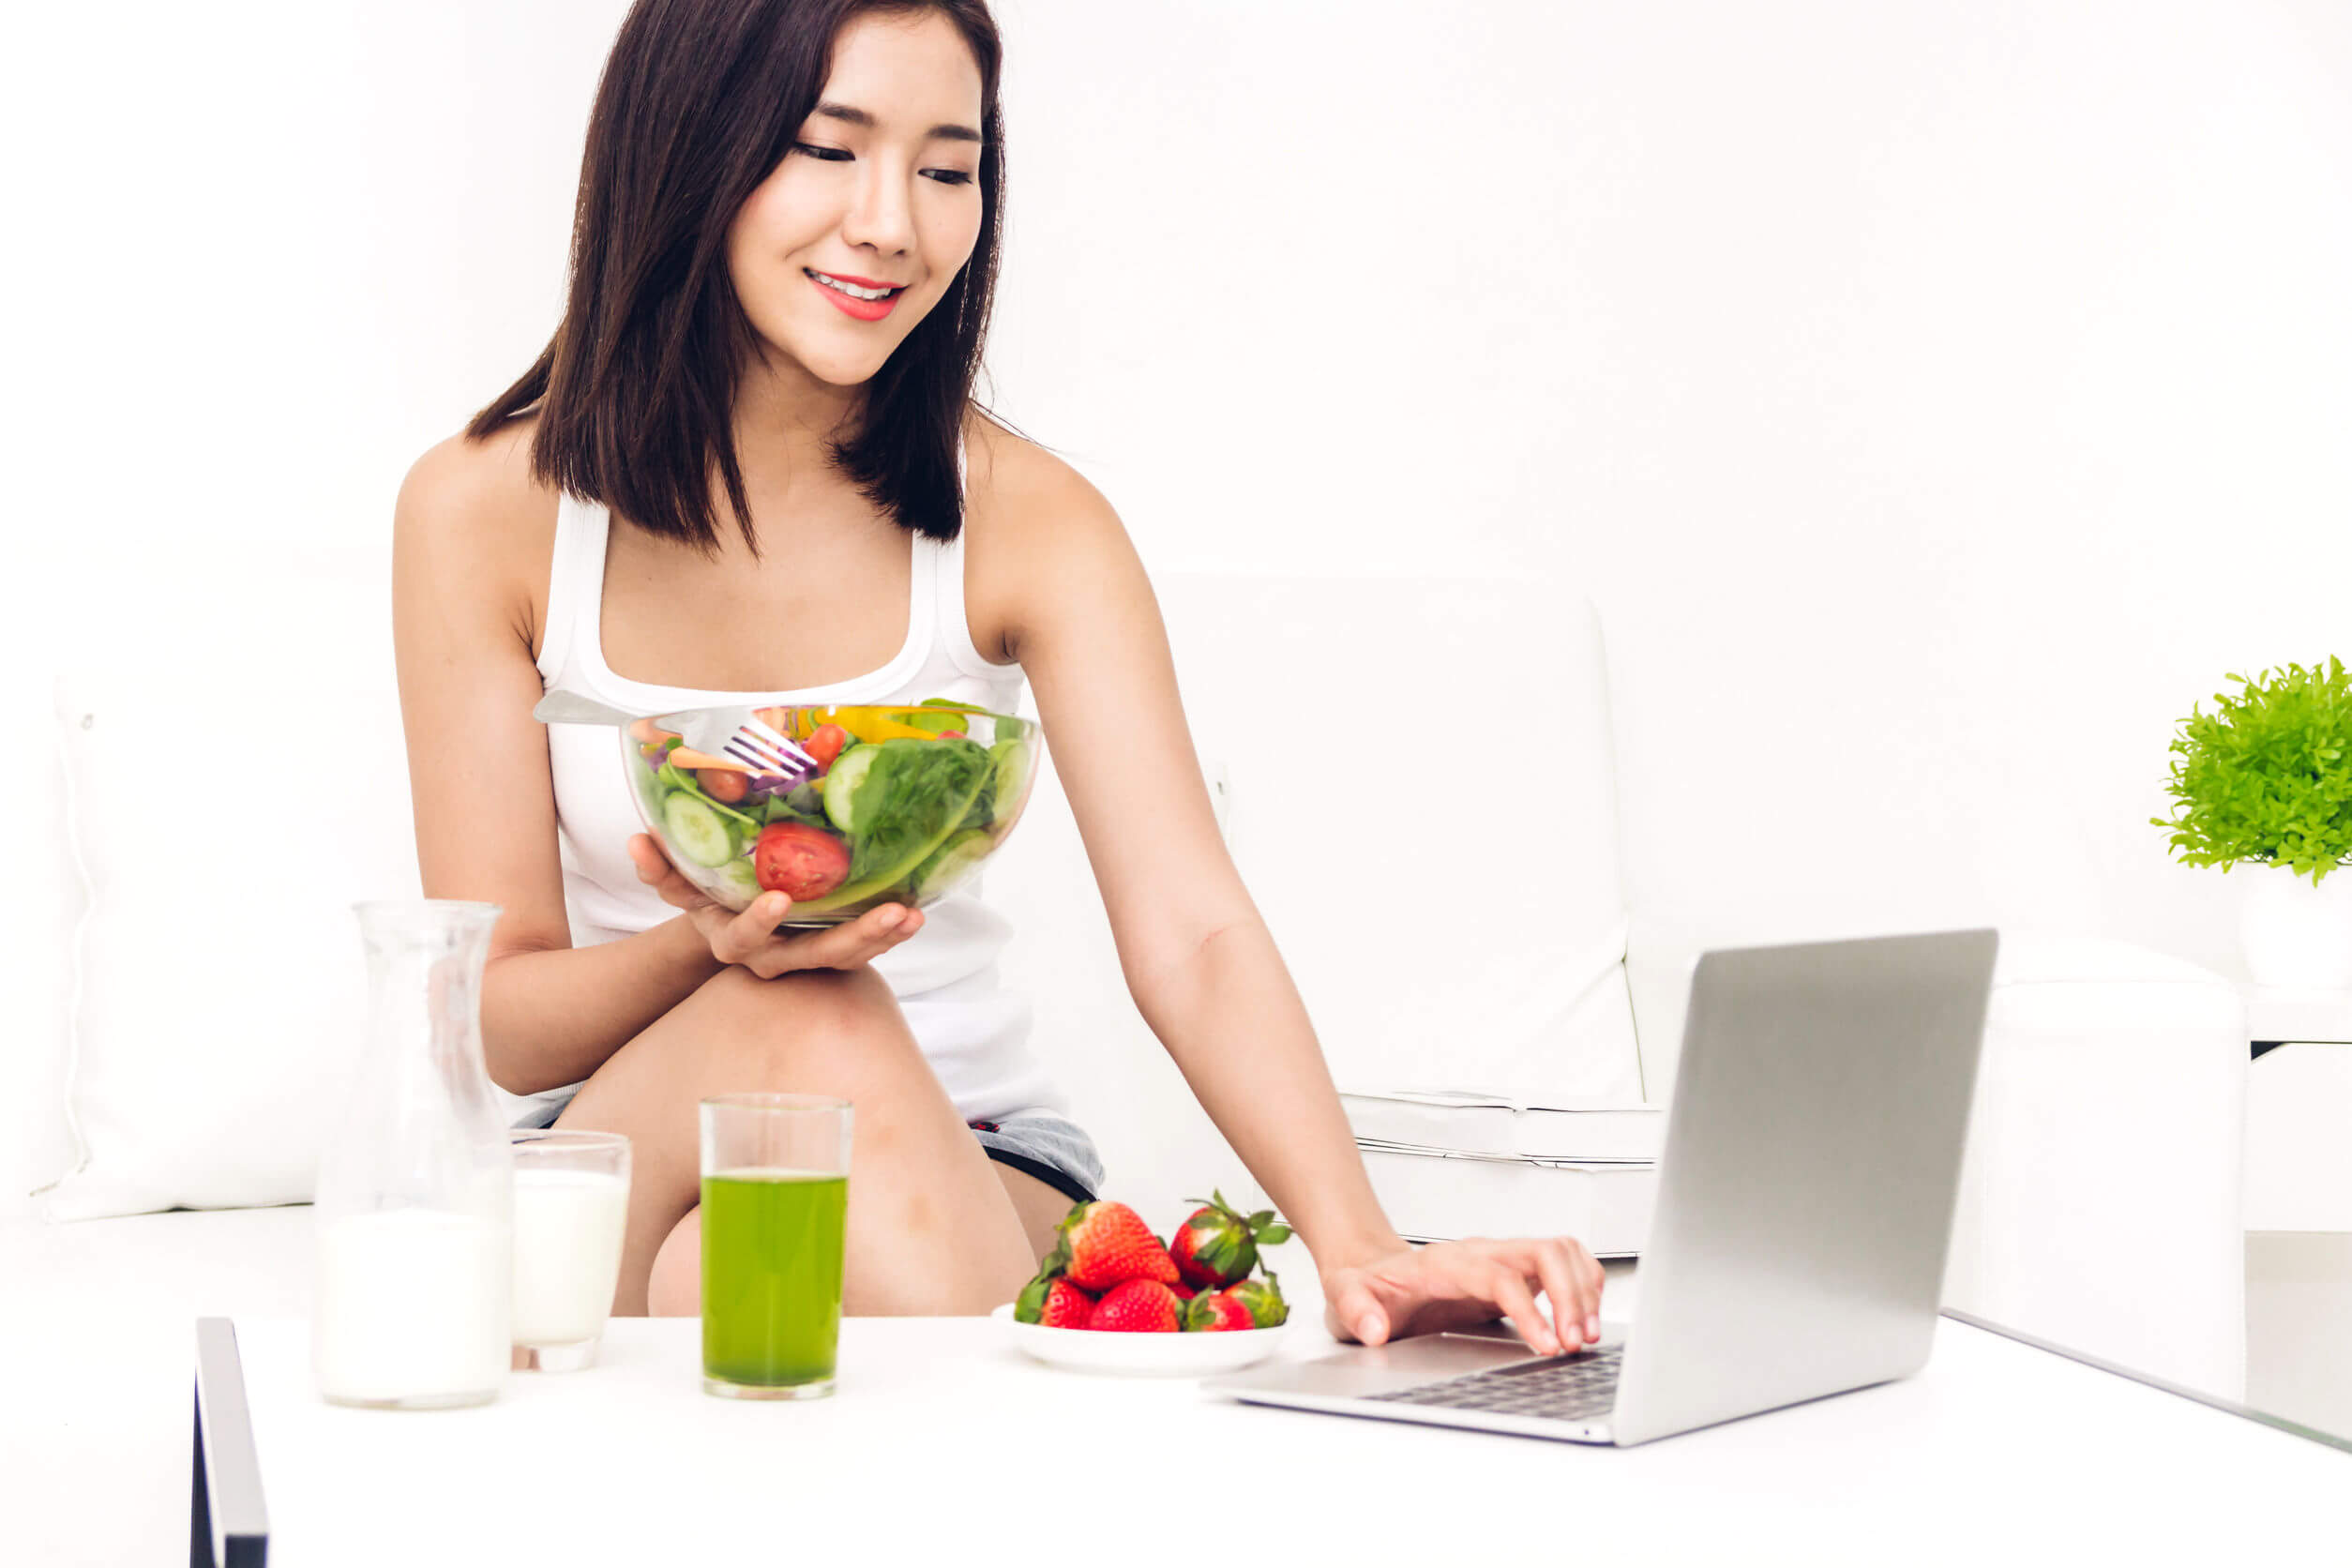 A young Asian women eating a fresh fruits and vegetables while working on her computer.